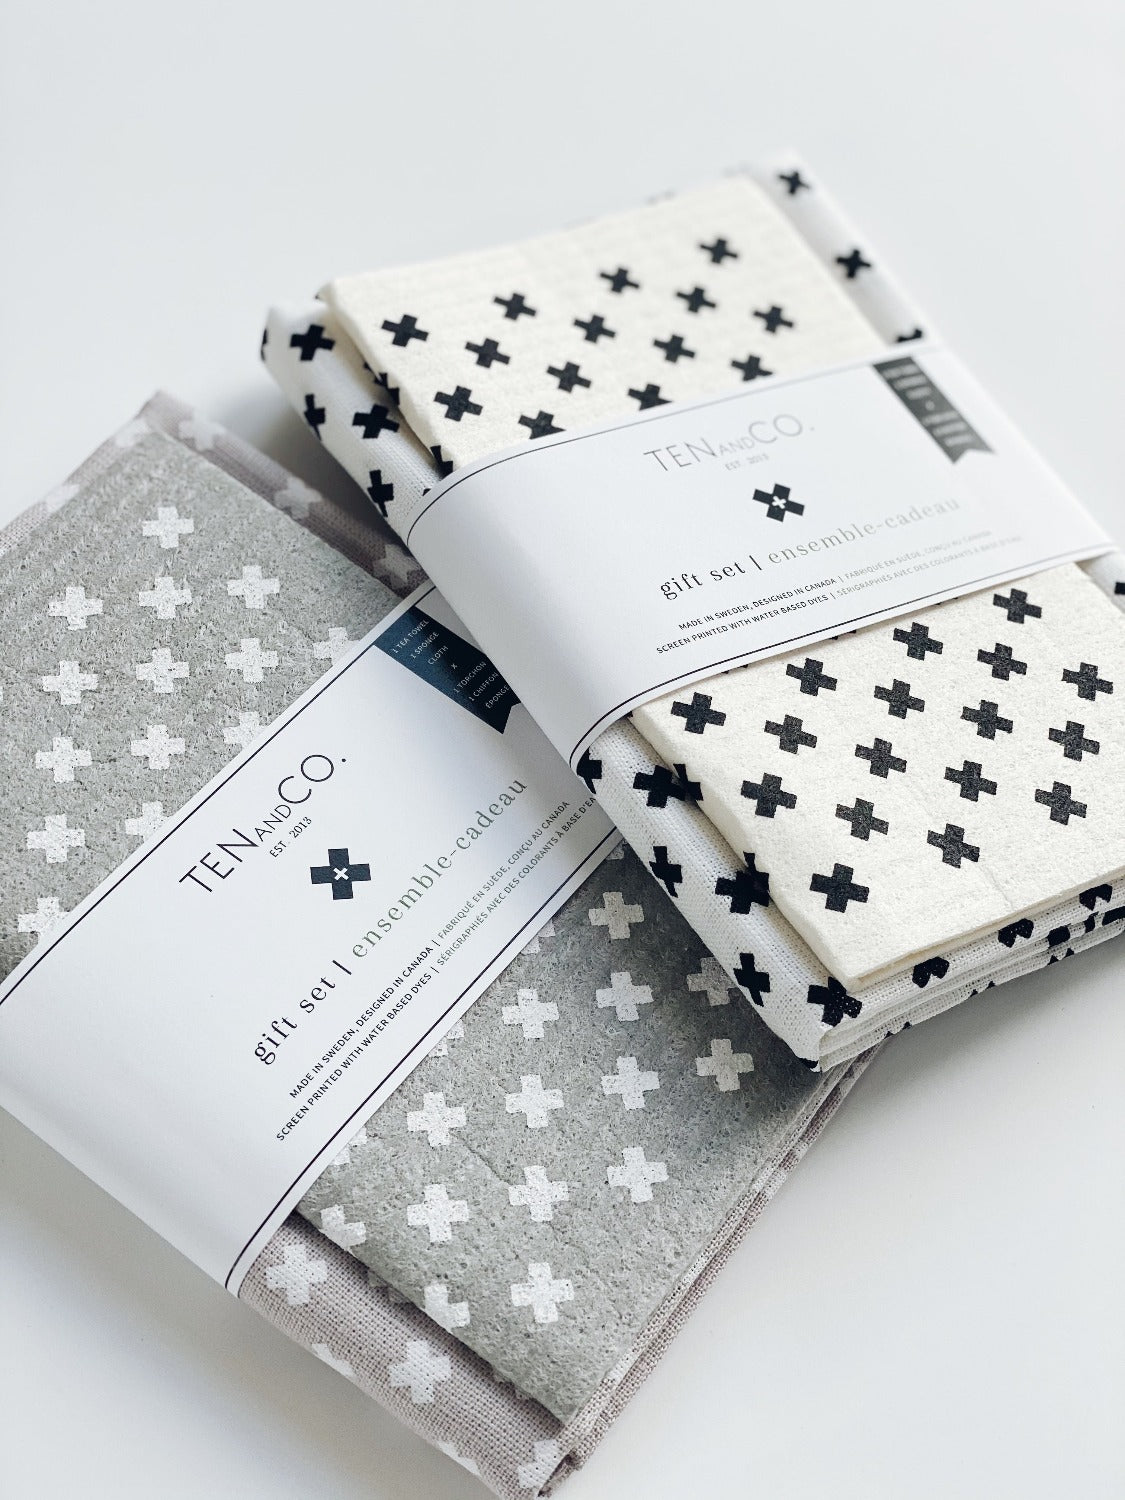 Product image of Tiny X White on Warm Grey gift set on a white background. In this image there are two gift sets with belly bands. The one on the left is Tiny X White on Warm Grey and the one on the right is Tiny X Black on white.